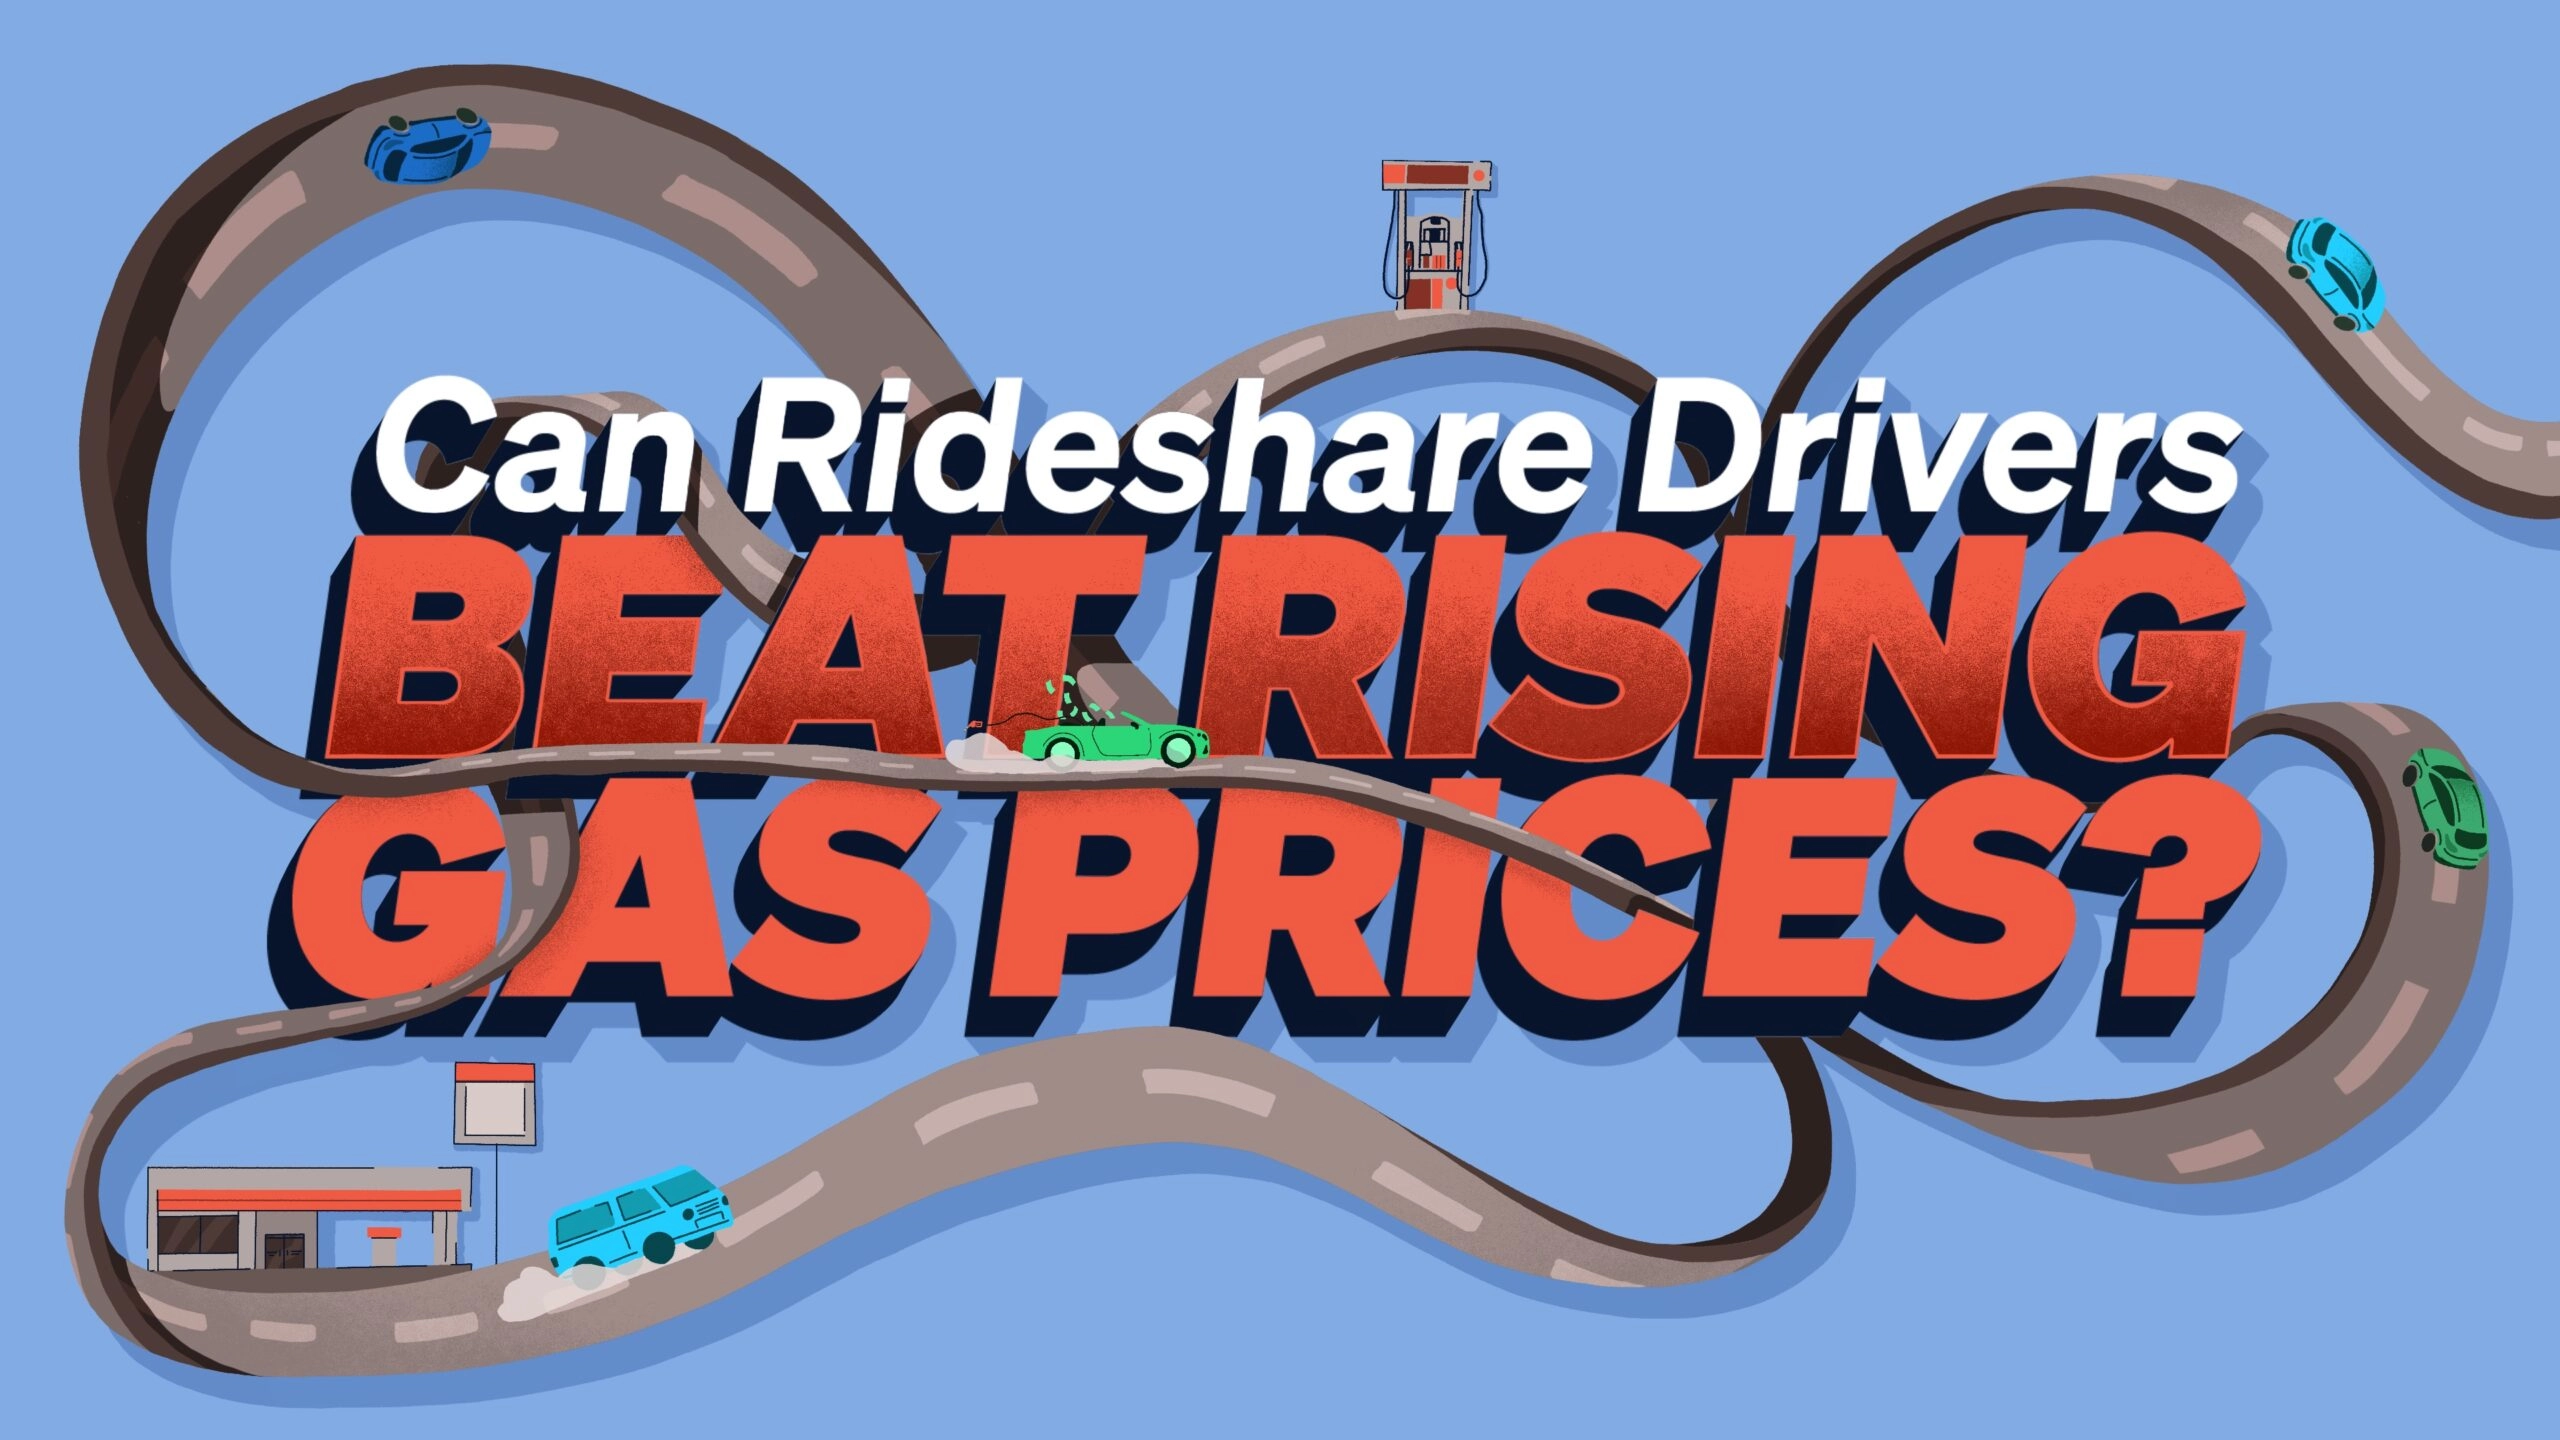 Can a Fuel Surcharge Help Rideshare Drivers Beat Rising Gas Prices?